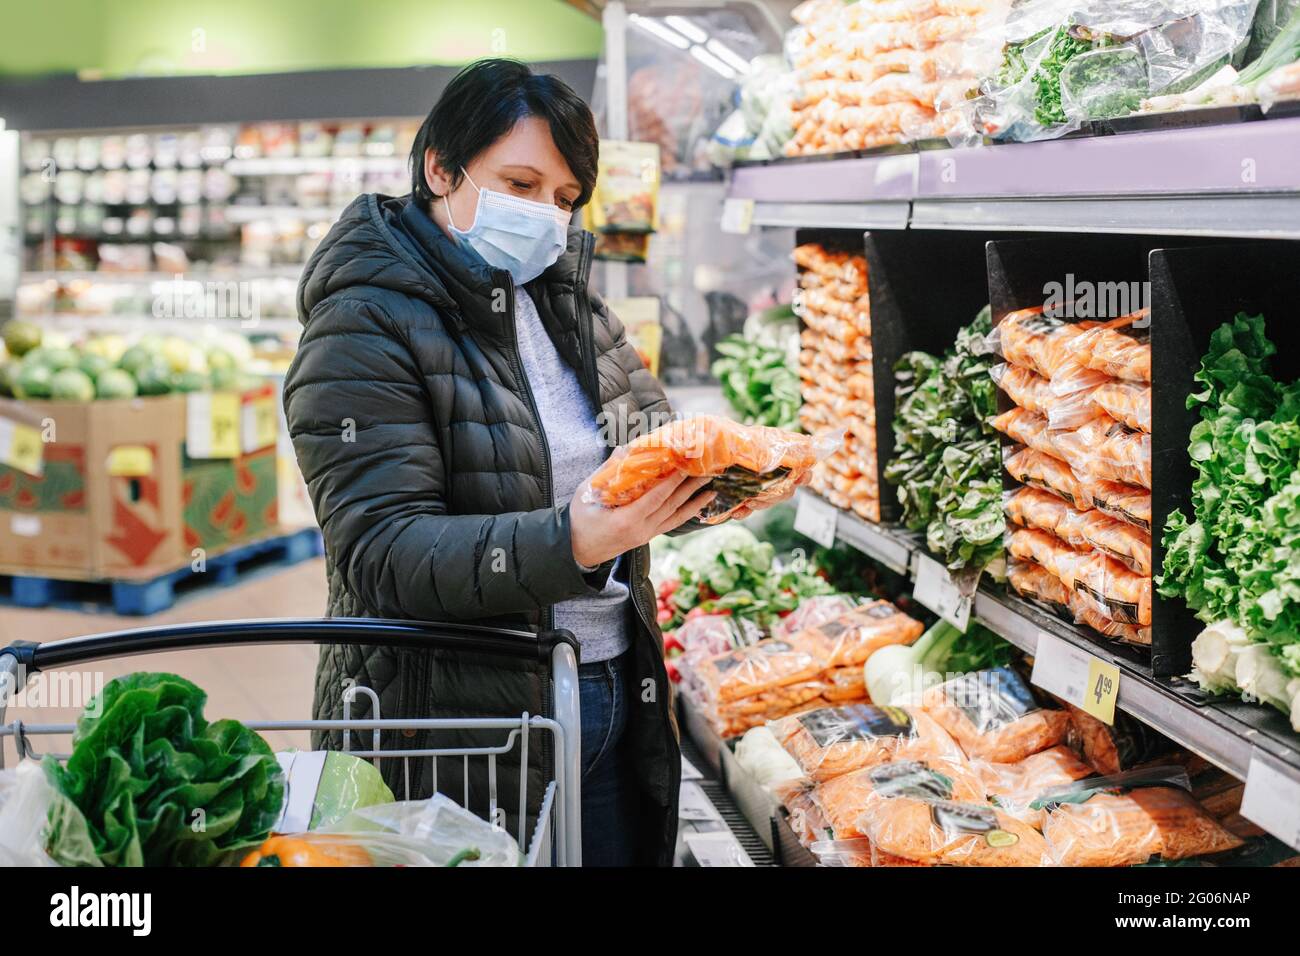 Grocery Shopping Middle Age Woman With Short Dark Hair In Blue